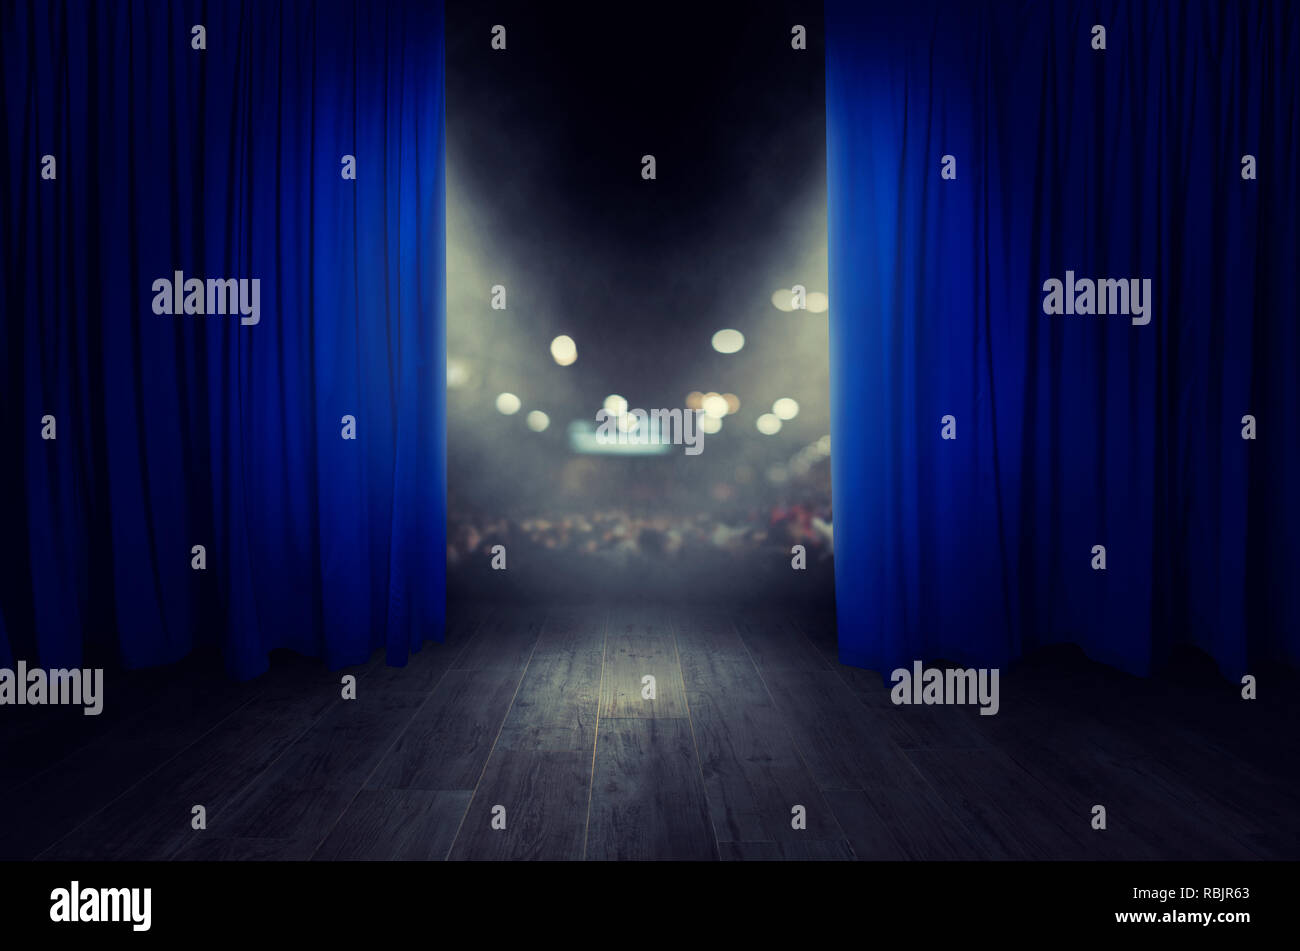 The blue curtains are opening for the theater show Stock Photo